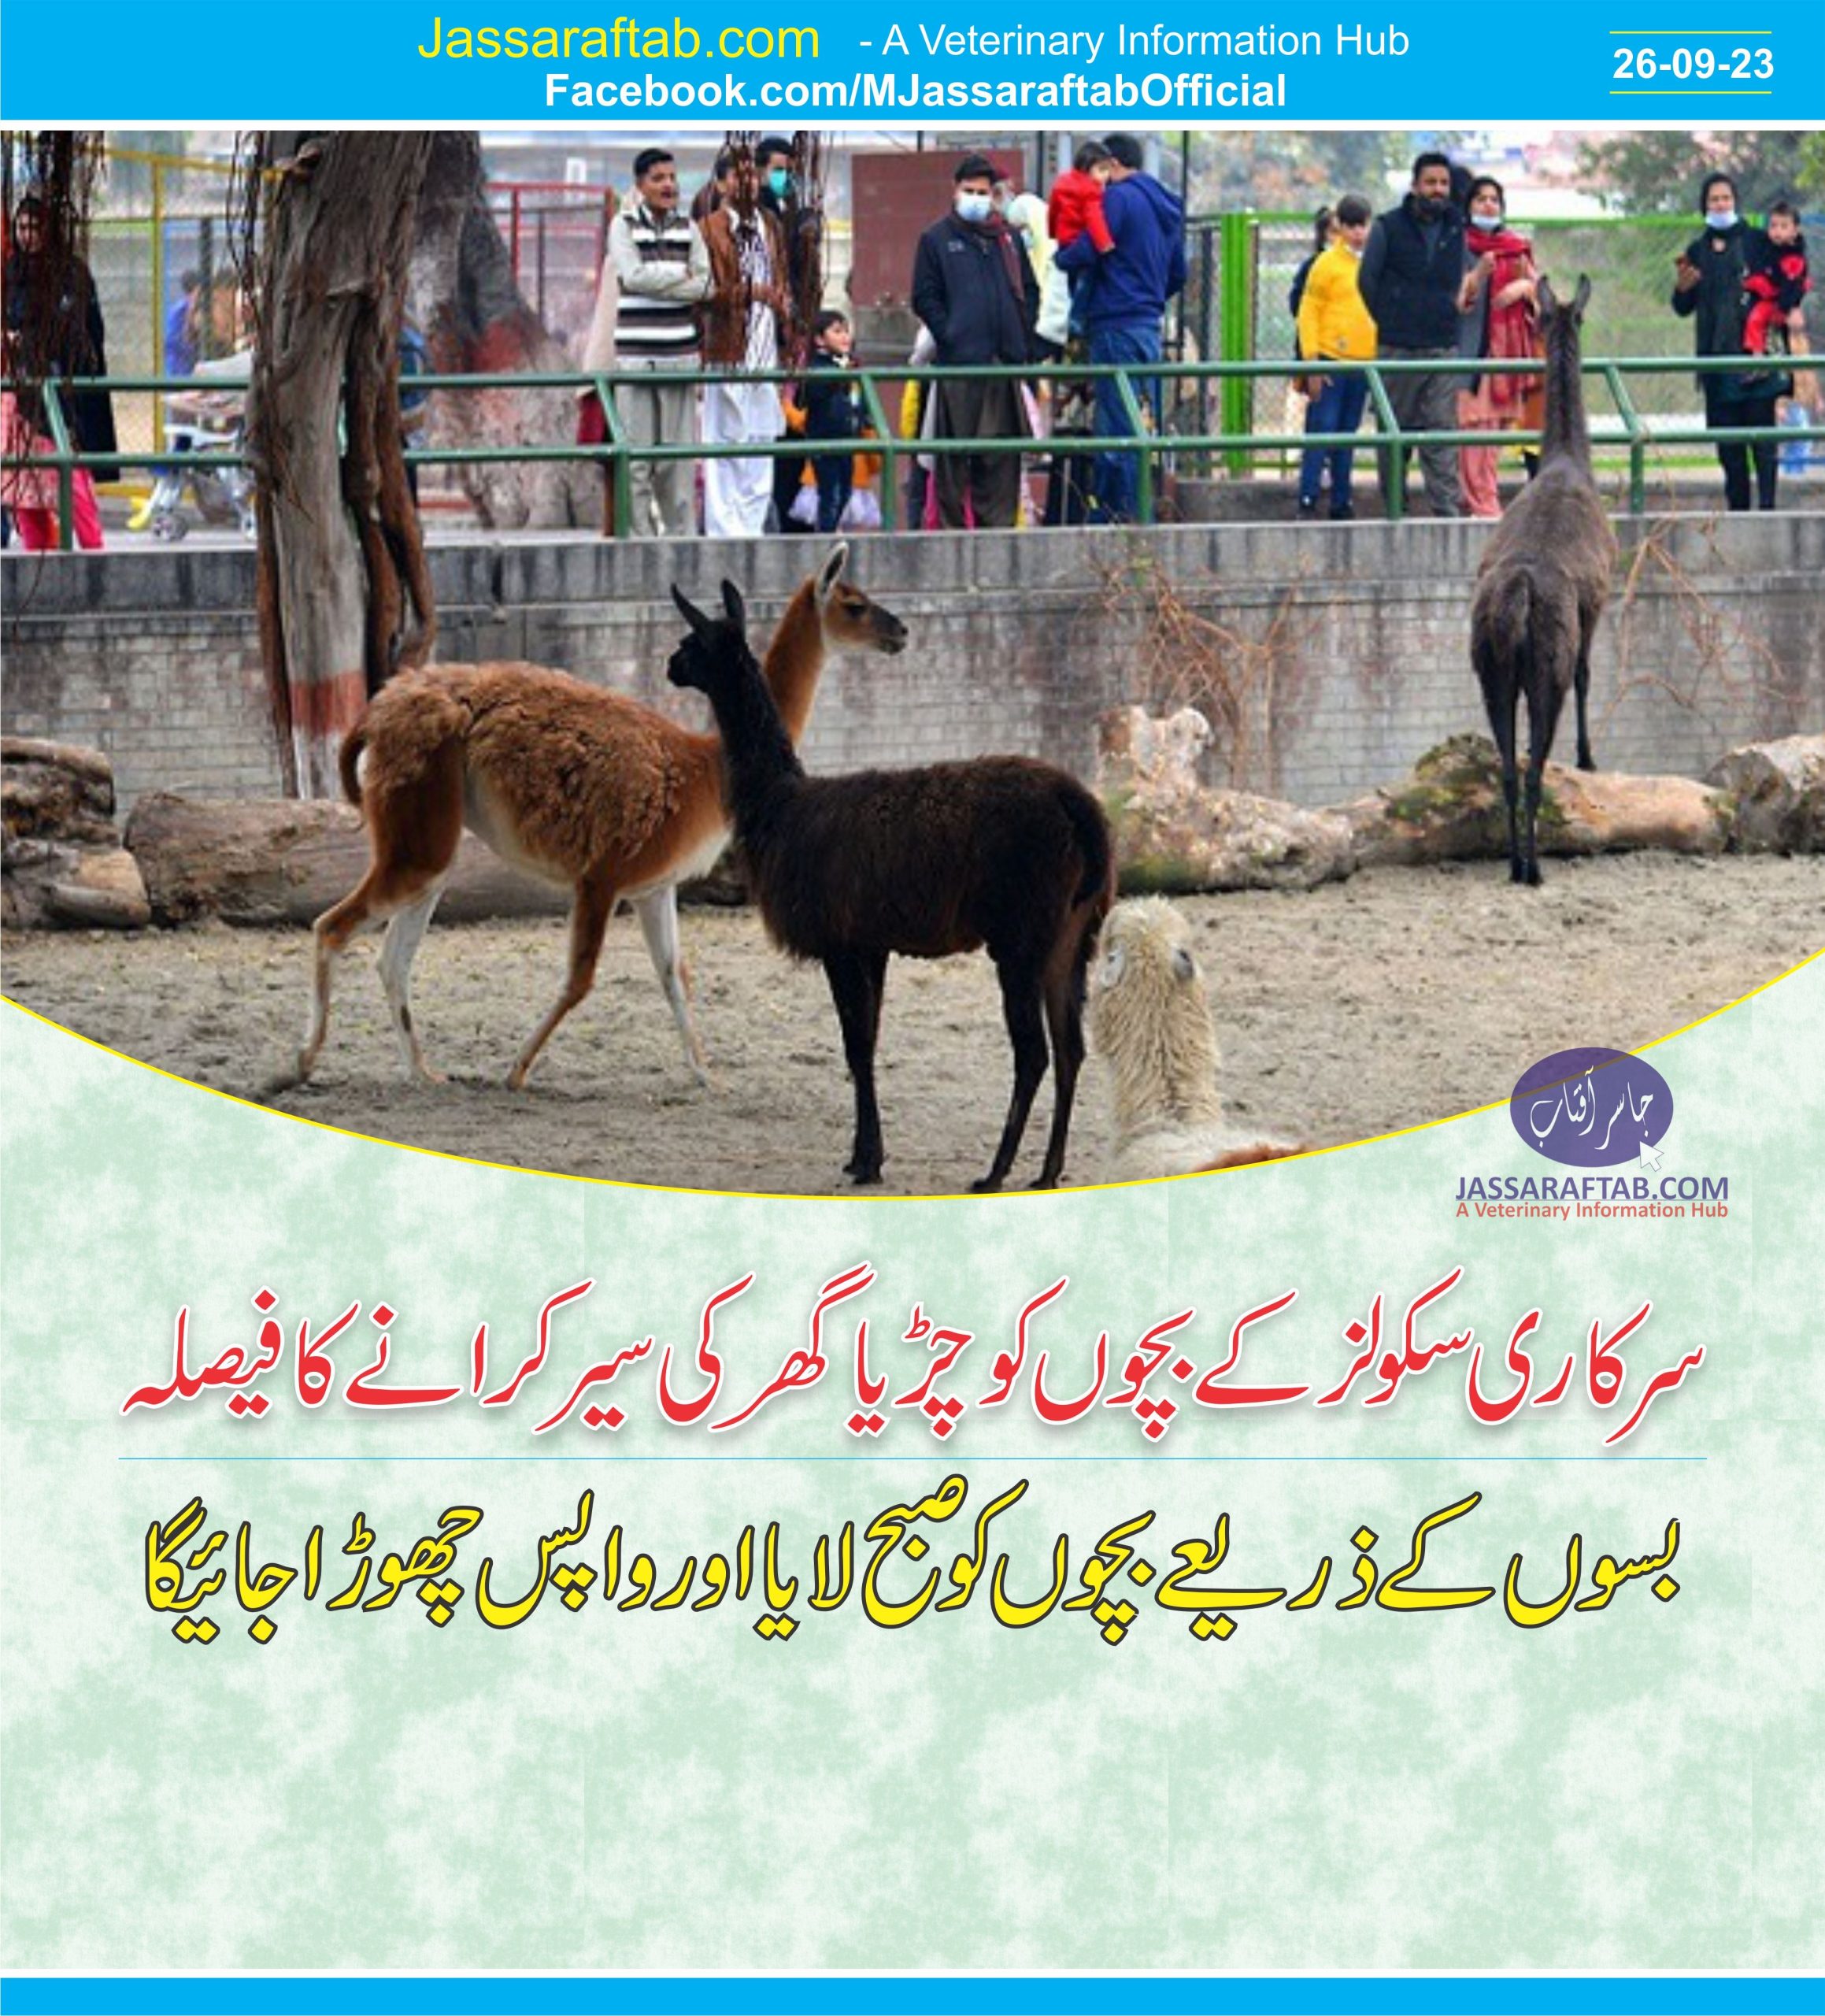 Govt School children will have opportunity to visit Zoo in Lahore